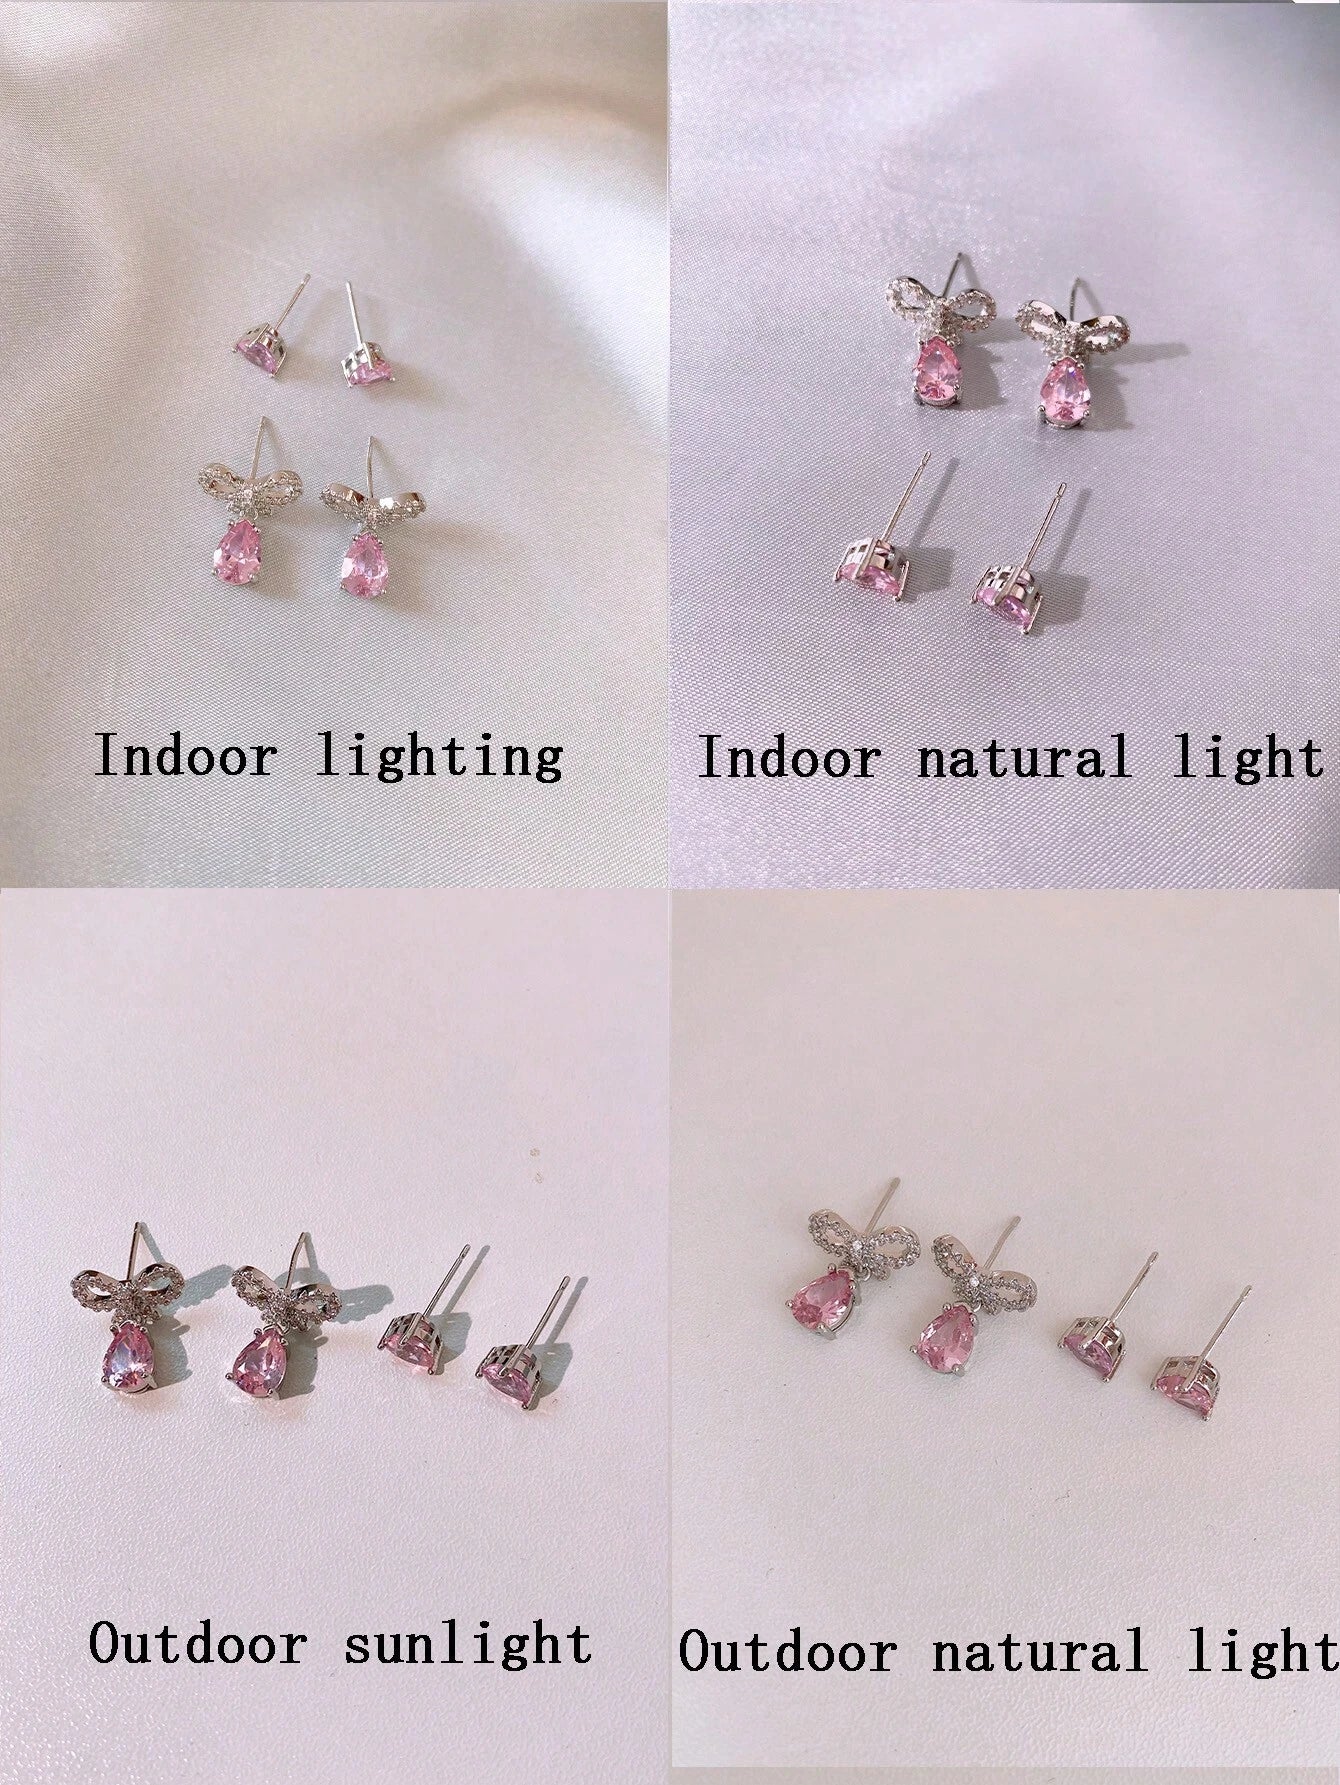 Set of 4 Earrings Decorated with Cubic Zirconia Bows and Hearts.